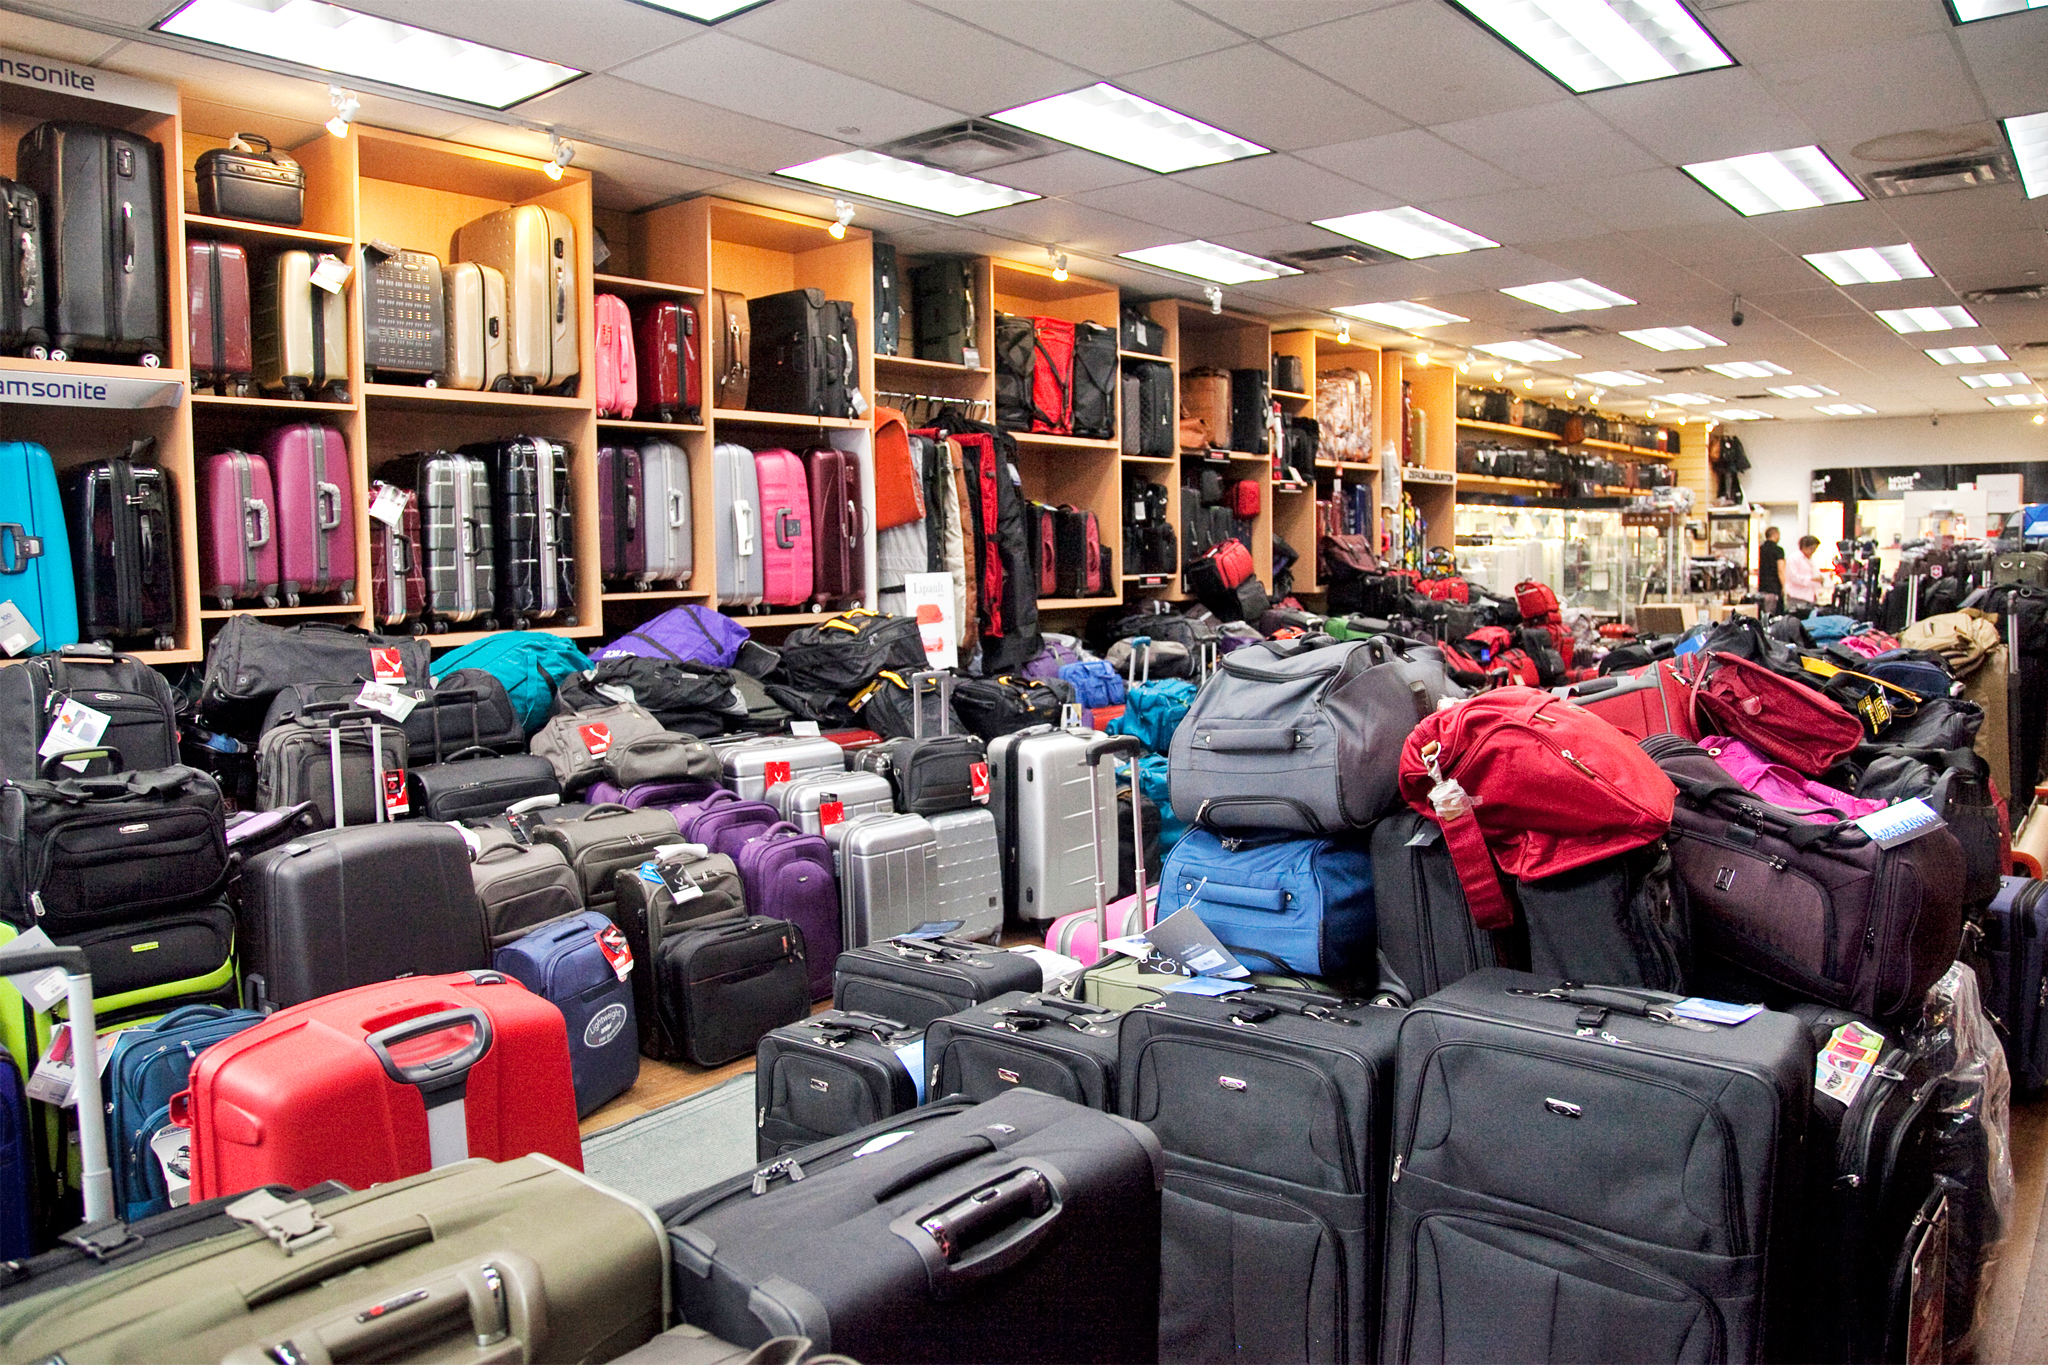 Are you planning to store your luggage without any issues?